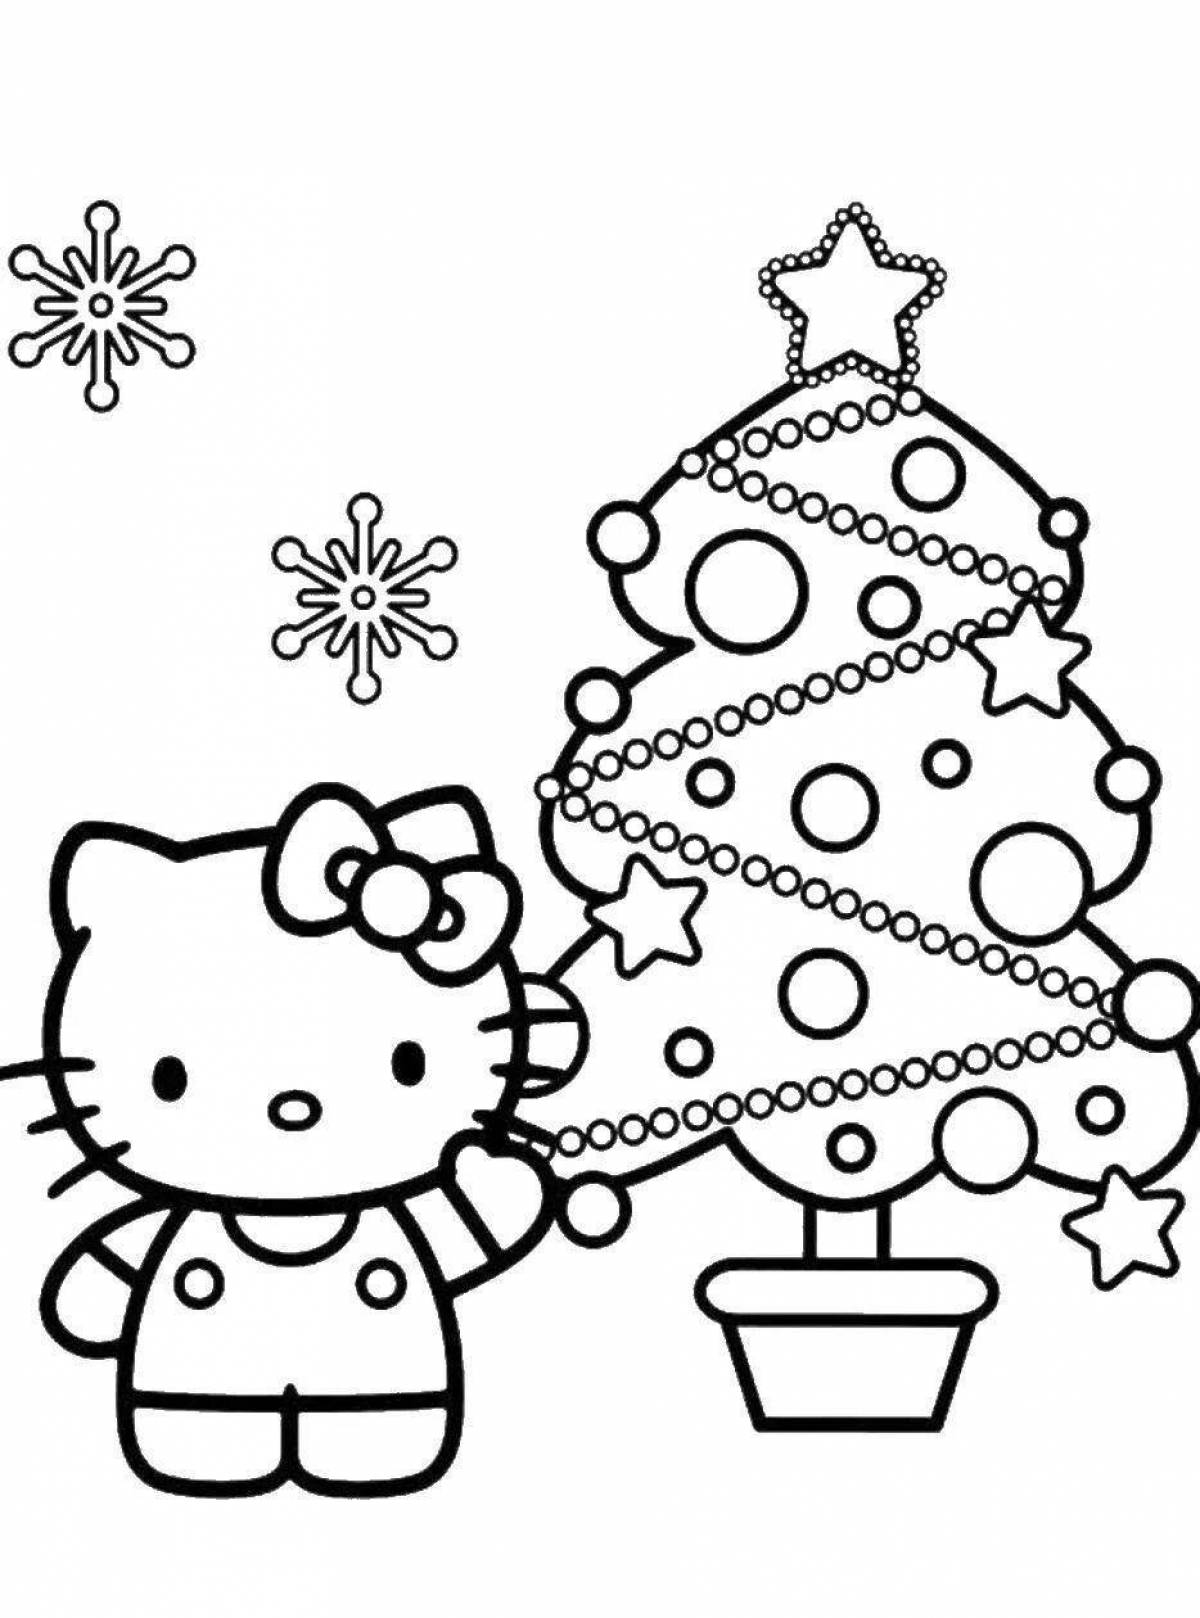 Charming Christmas tree coloring book for kids 6-7 years old